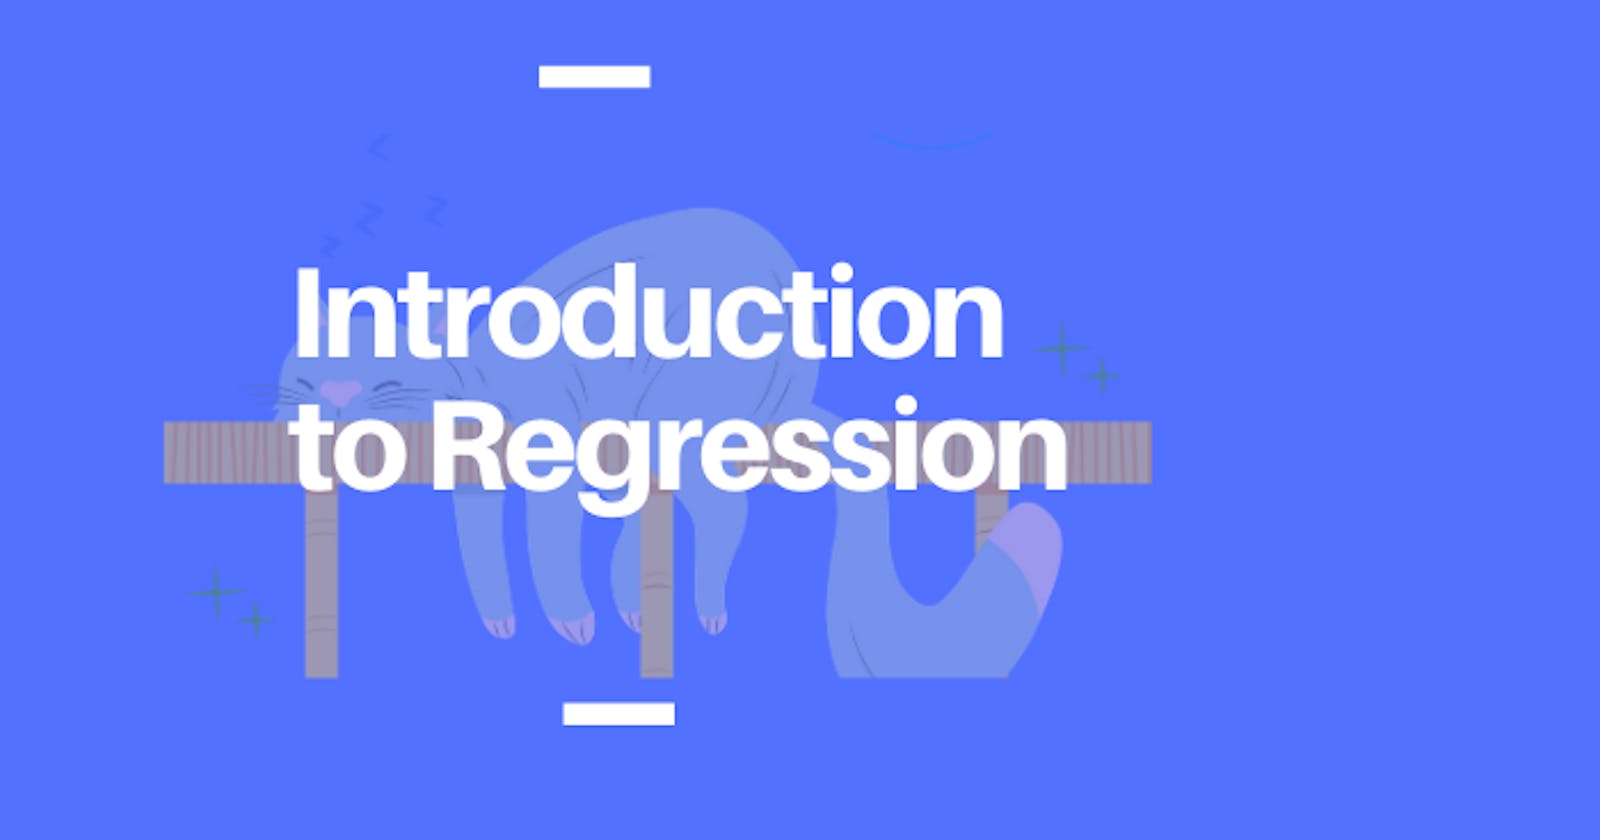 Introduction to Regression